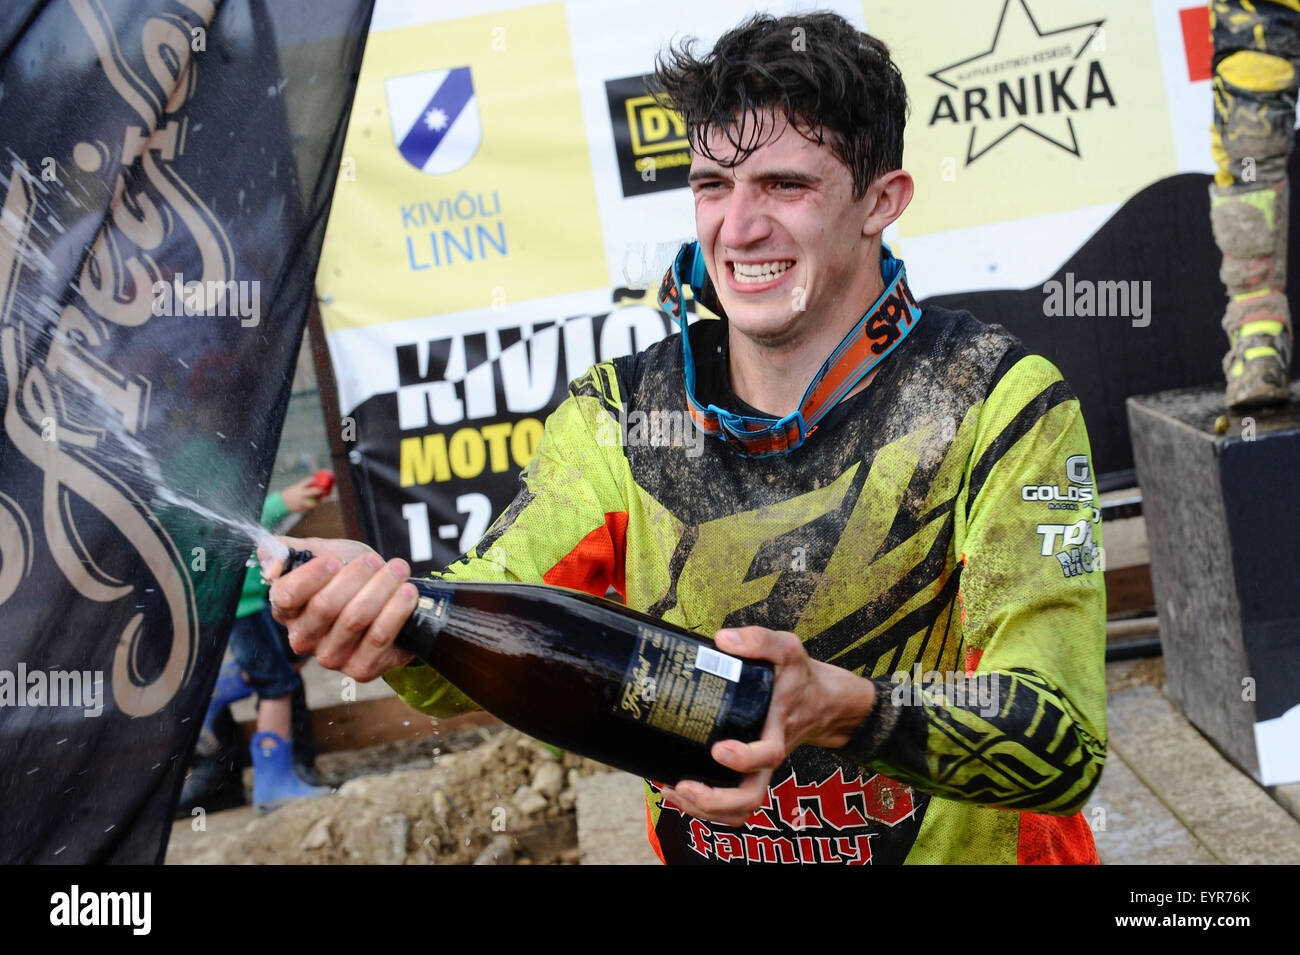 North-Eastern Estonia. 2nd Aug, 2015. 2nd Aug, 2015. The leader of ITP Quadrocross European Championship and the winner of 5th round in Kivioli Latvian racer Edgars Mengelis celebrates during the flower ceremony at the 5th round of championship, which was held at Kivioli Motocross Track in North-Eastern Estonia, on Aug. 2, 2015. Credit:  Sergei Stepanov/Xinhua/Alamy Live News Stock Photo